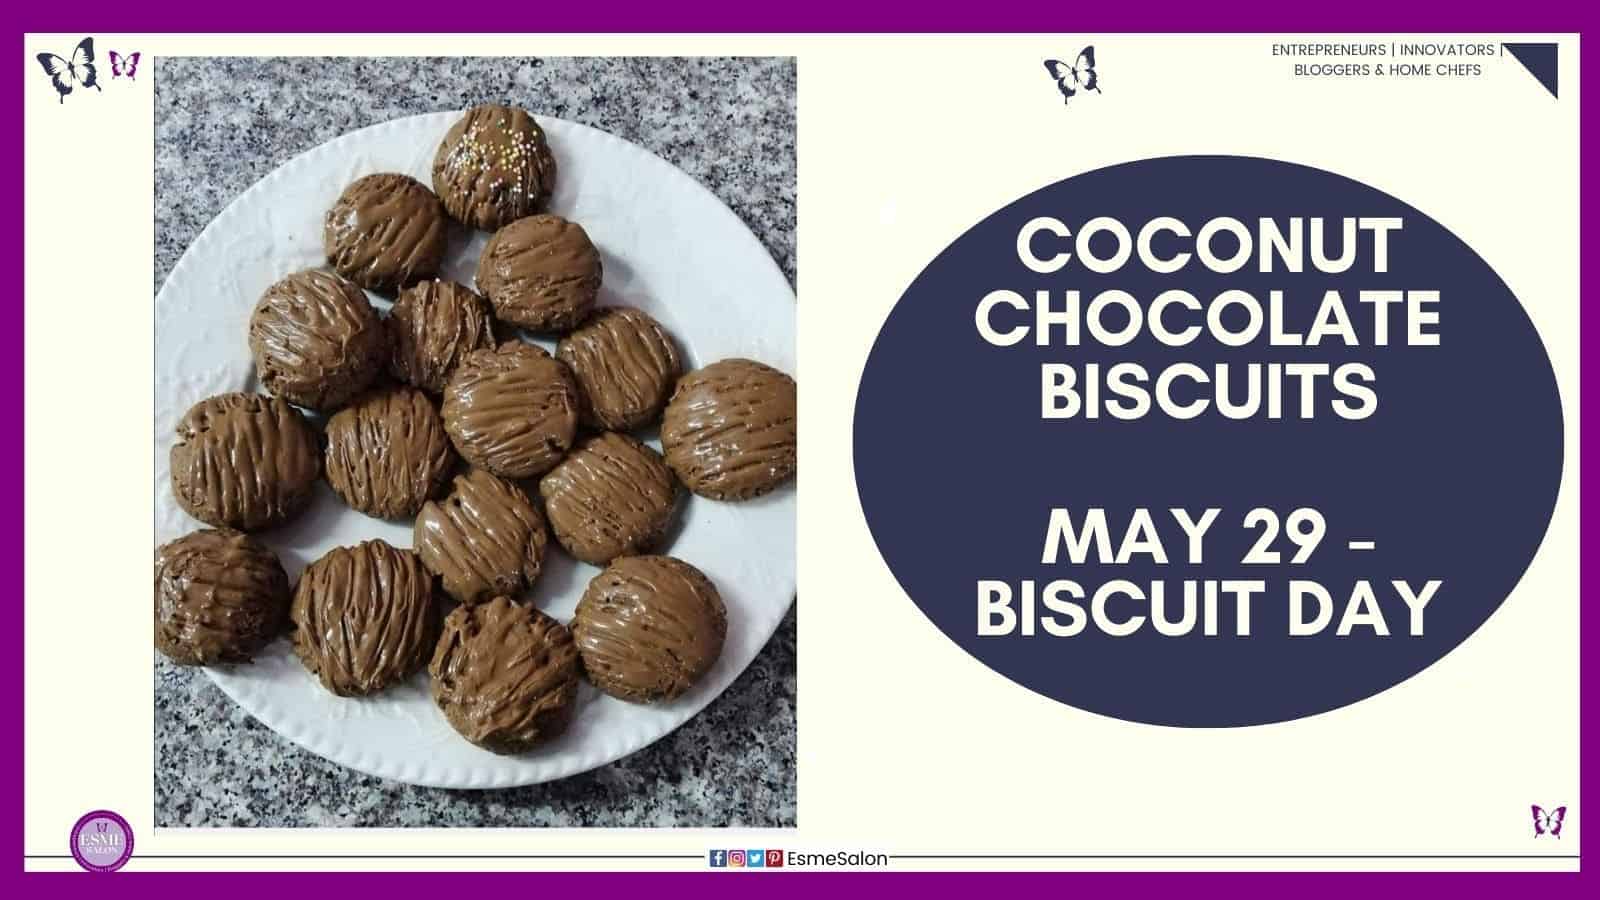 an image of round Coconut Chocolate Biscuits on a while plate